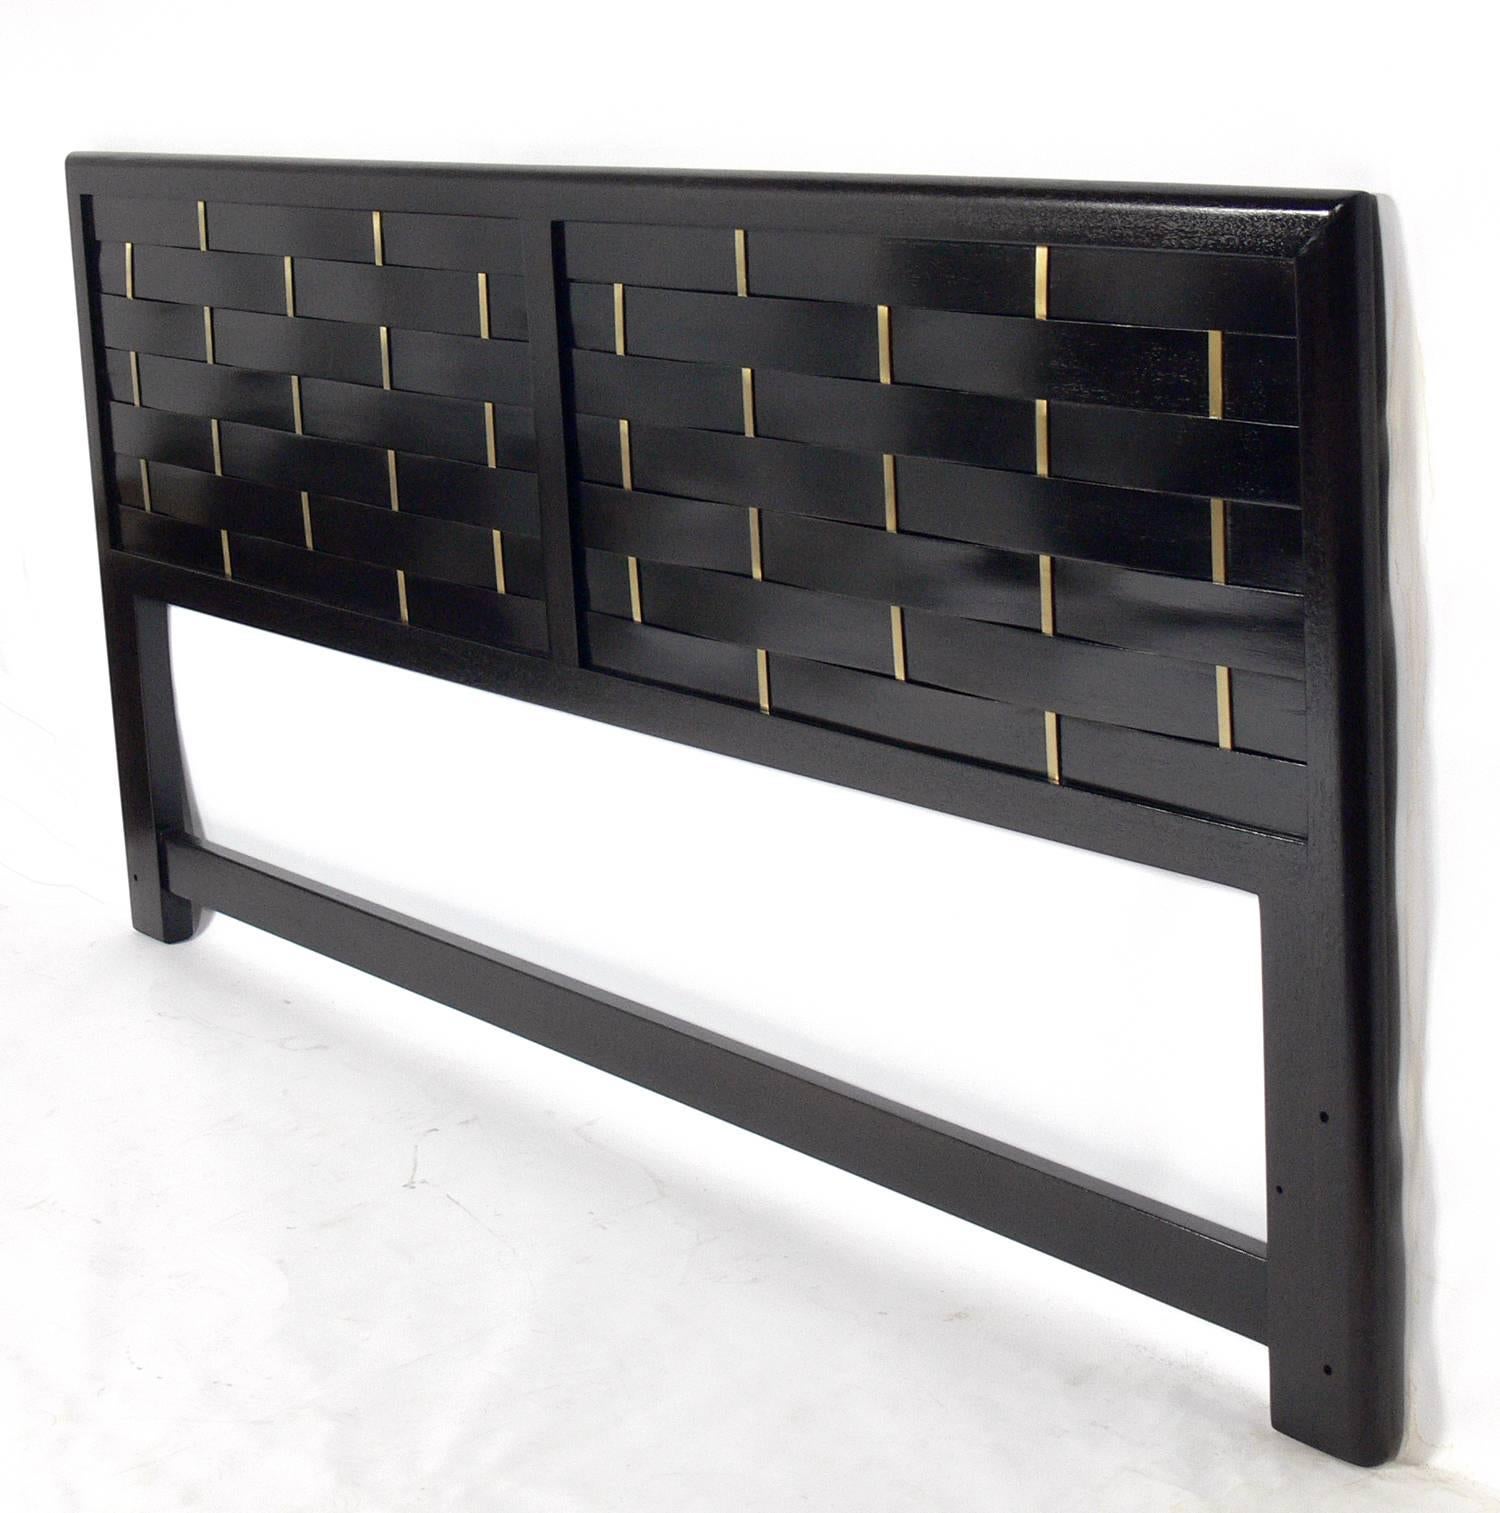 Modernist woven lacquered wood and brass headboard, designed by Harvey Probber, American, circa 1960s. This piece has been refinished. It measures 80